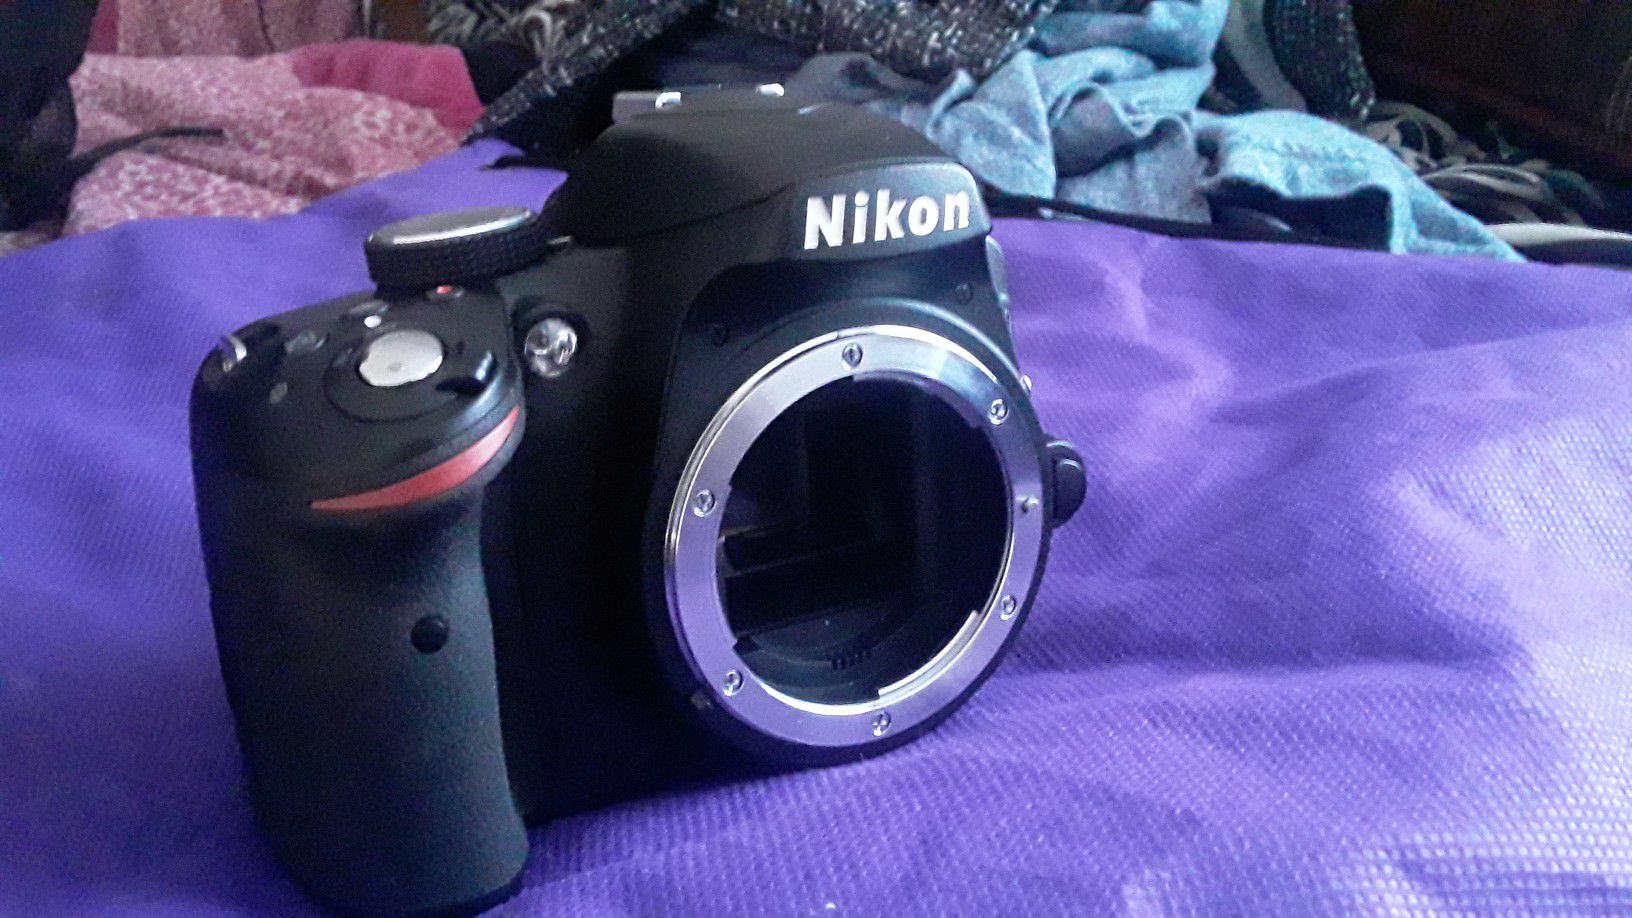 Nikon D3200 digital camera/ VR Nikon DX AF-S 18-55mm 1:3.5-5.6G) missing lens cover and charger, but works perfect with no scratches.